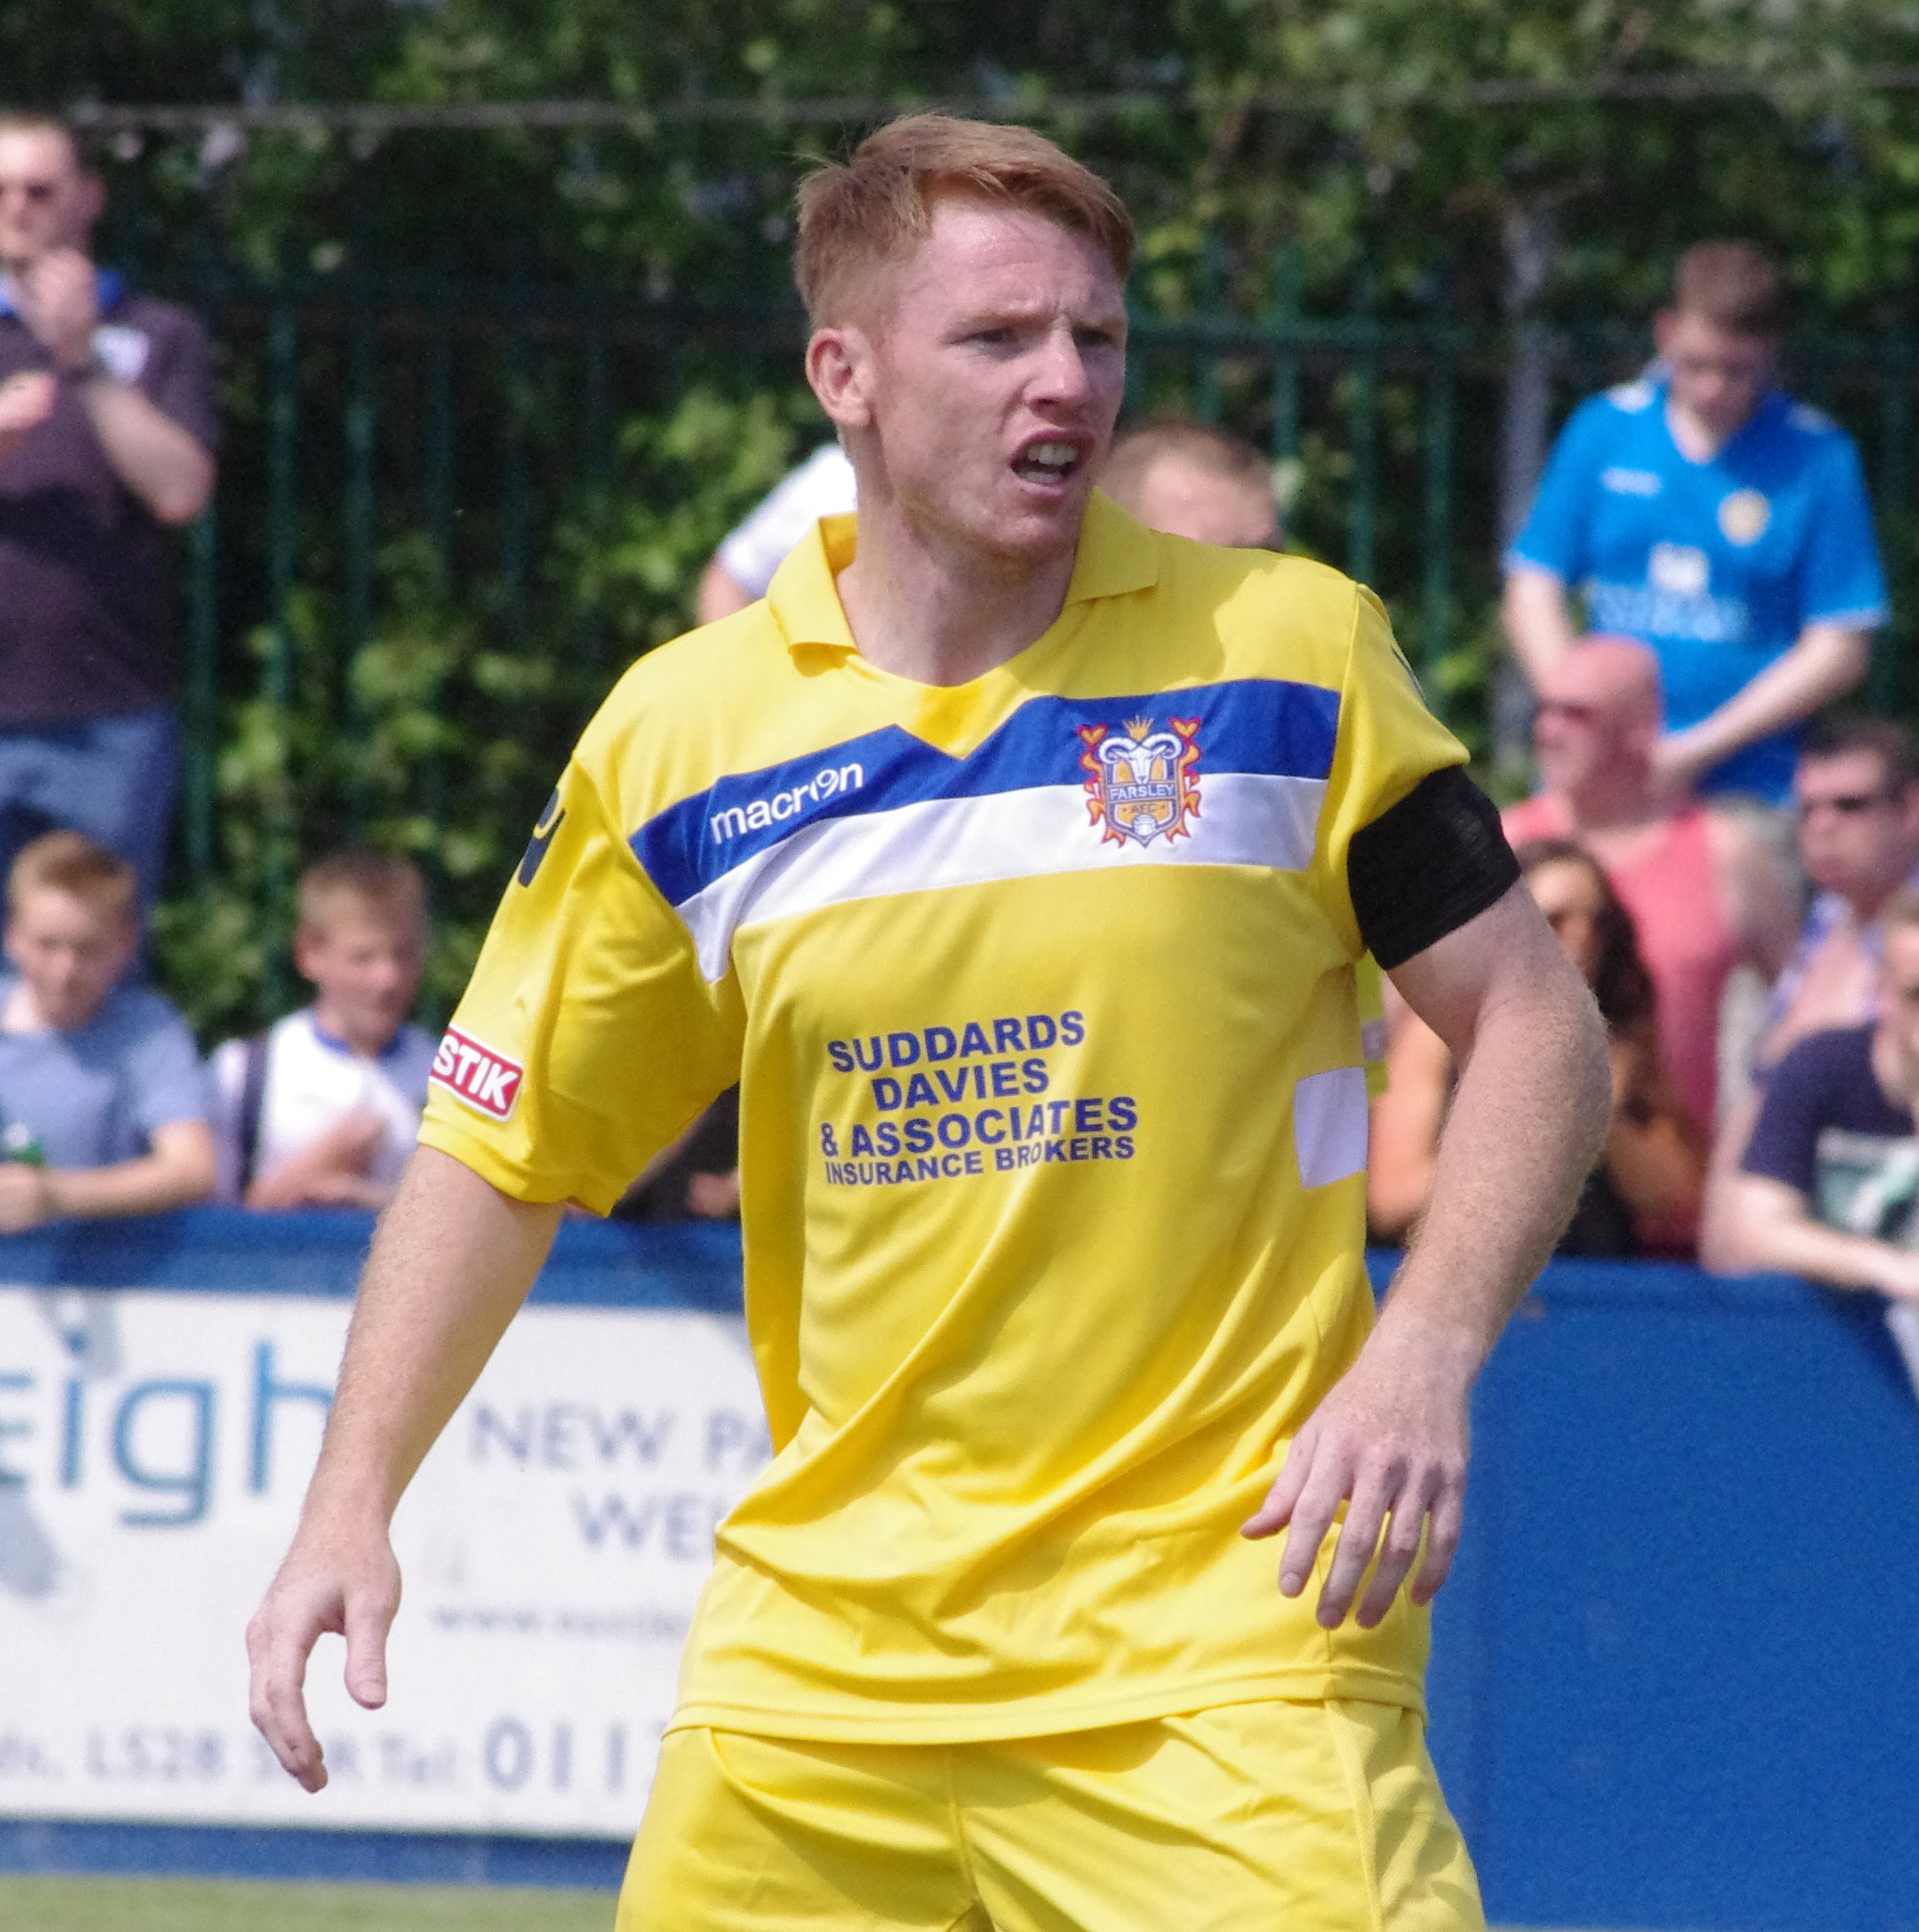 Farsley AFC captain Robbie O'Brien scored the winning penalty as Farsley shot to second in the Evo Stik Div One North table